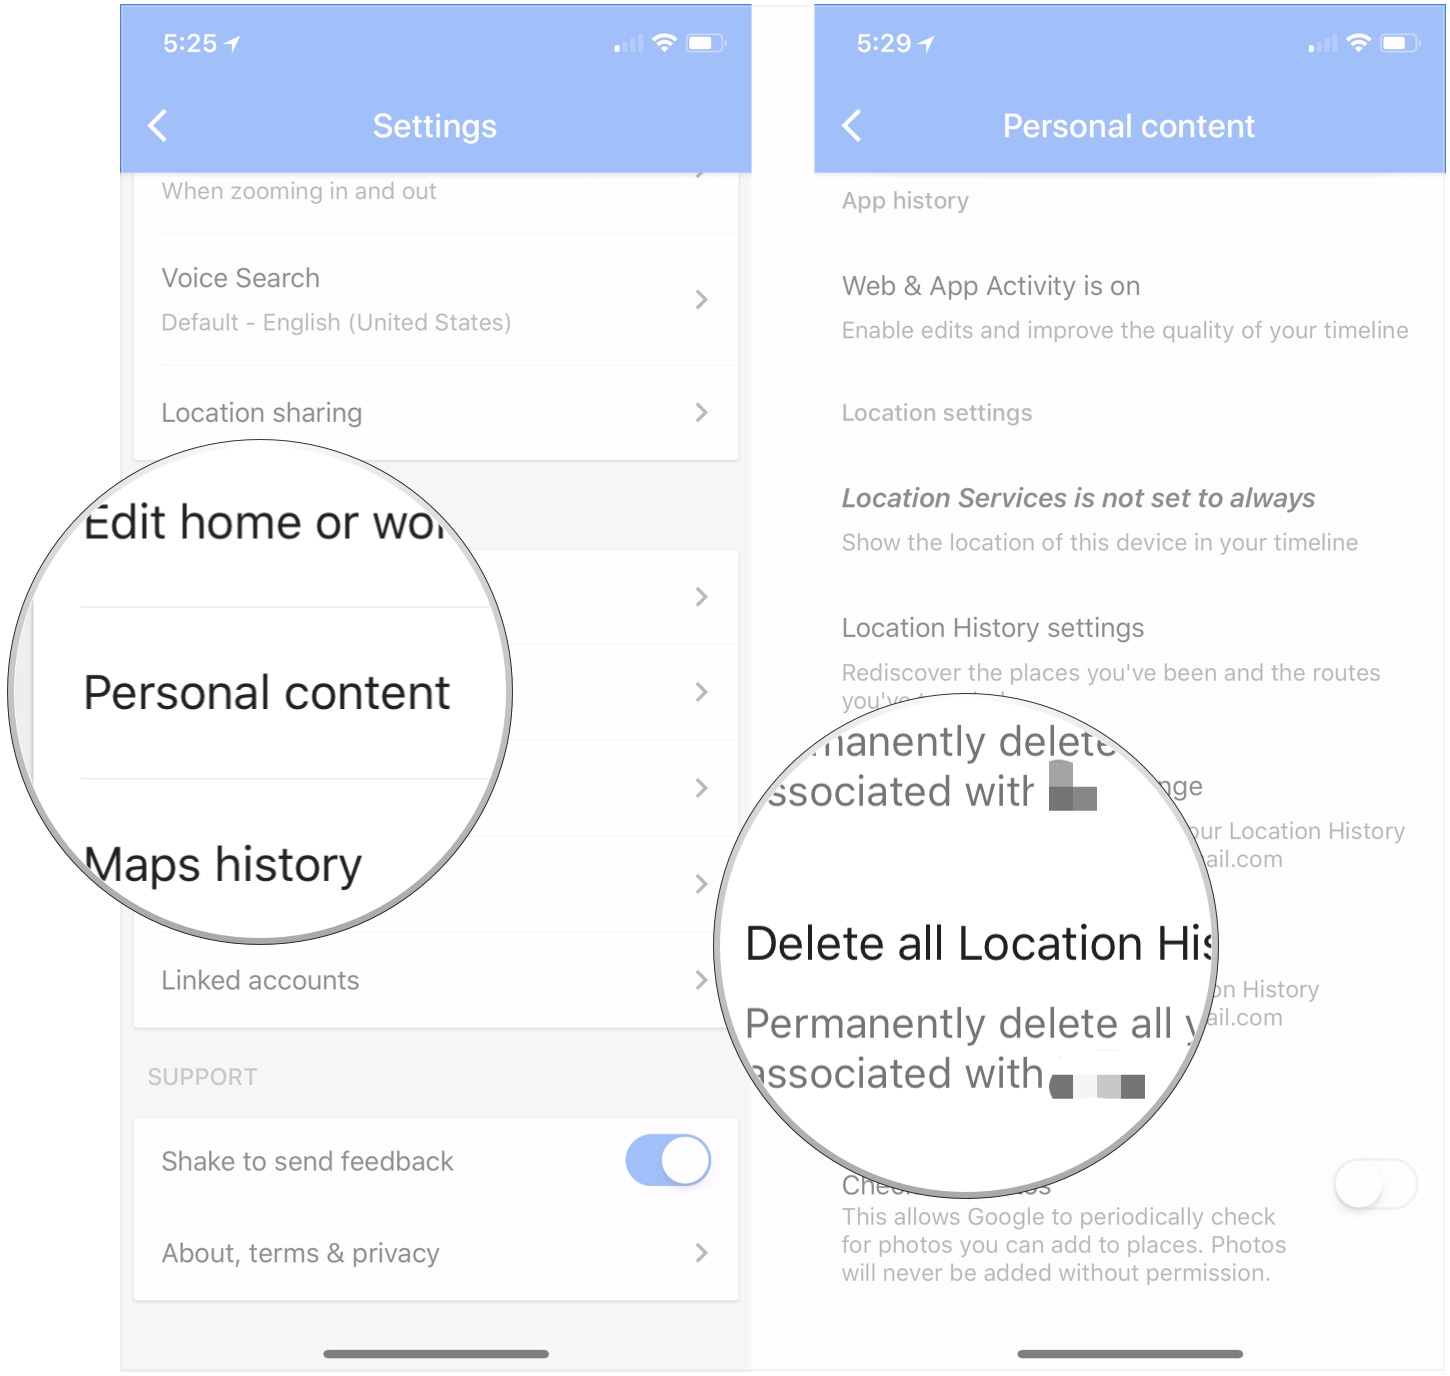 Tap Personal content, tap Delete all Location History